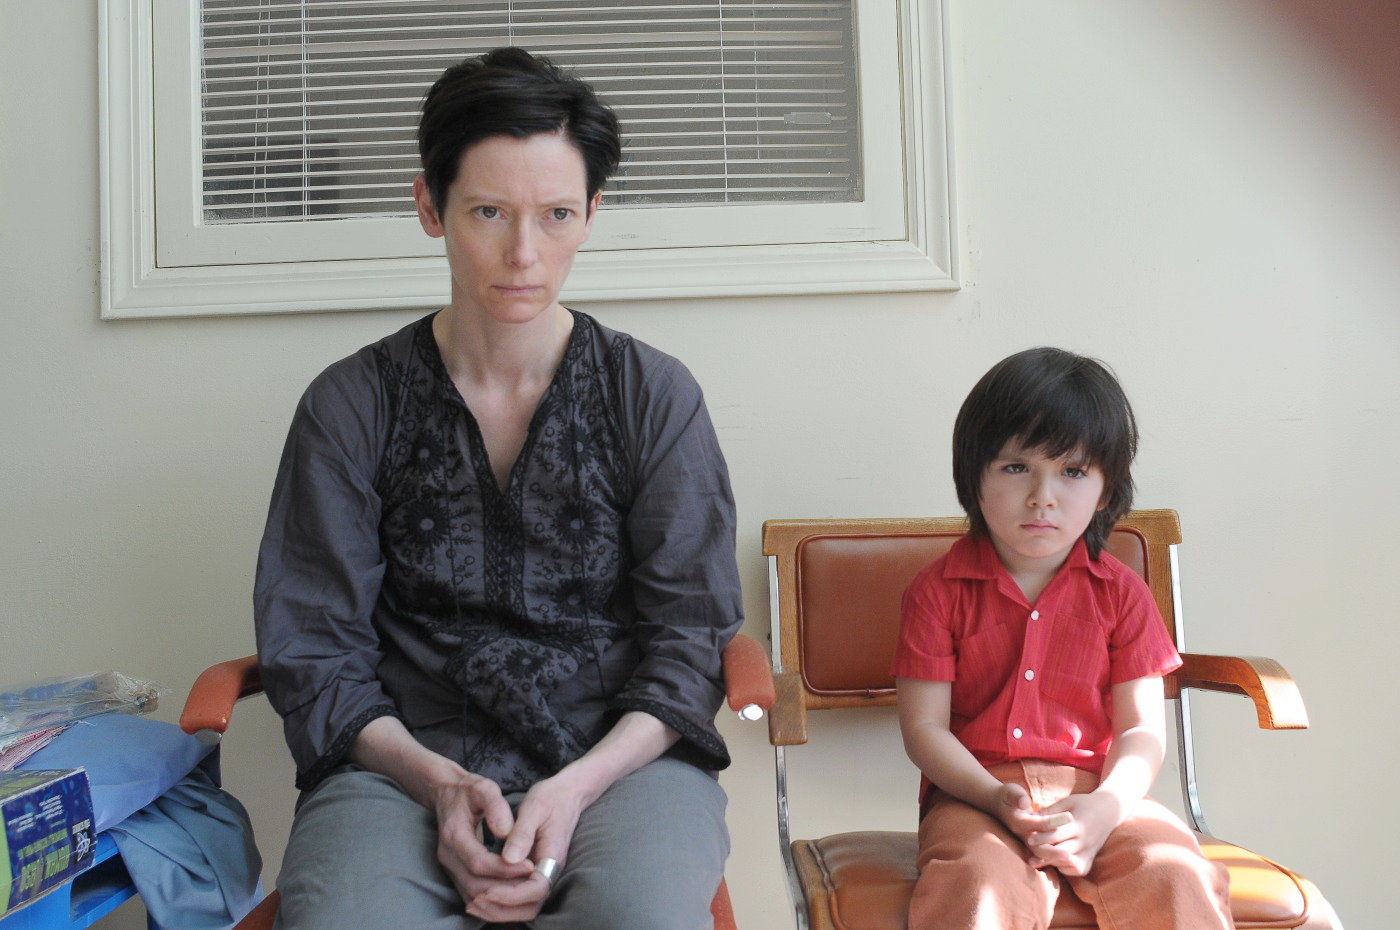 Tilda Swinton star as Eva and Jasper Newell stars as Young Kevin in Oscilloscope Laboratories' We Need to Talk About Kevin (2012)